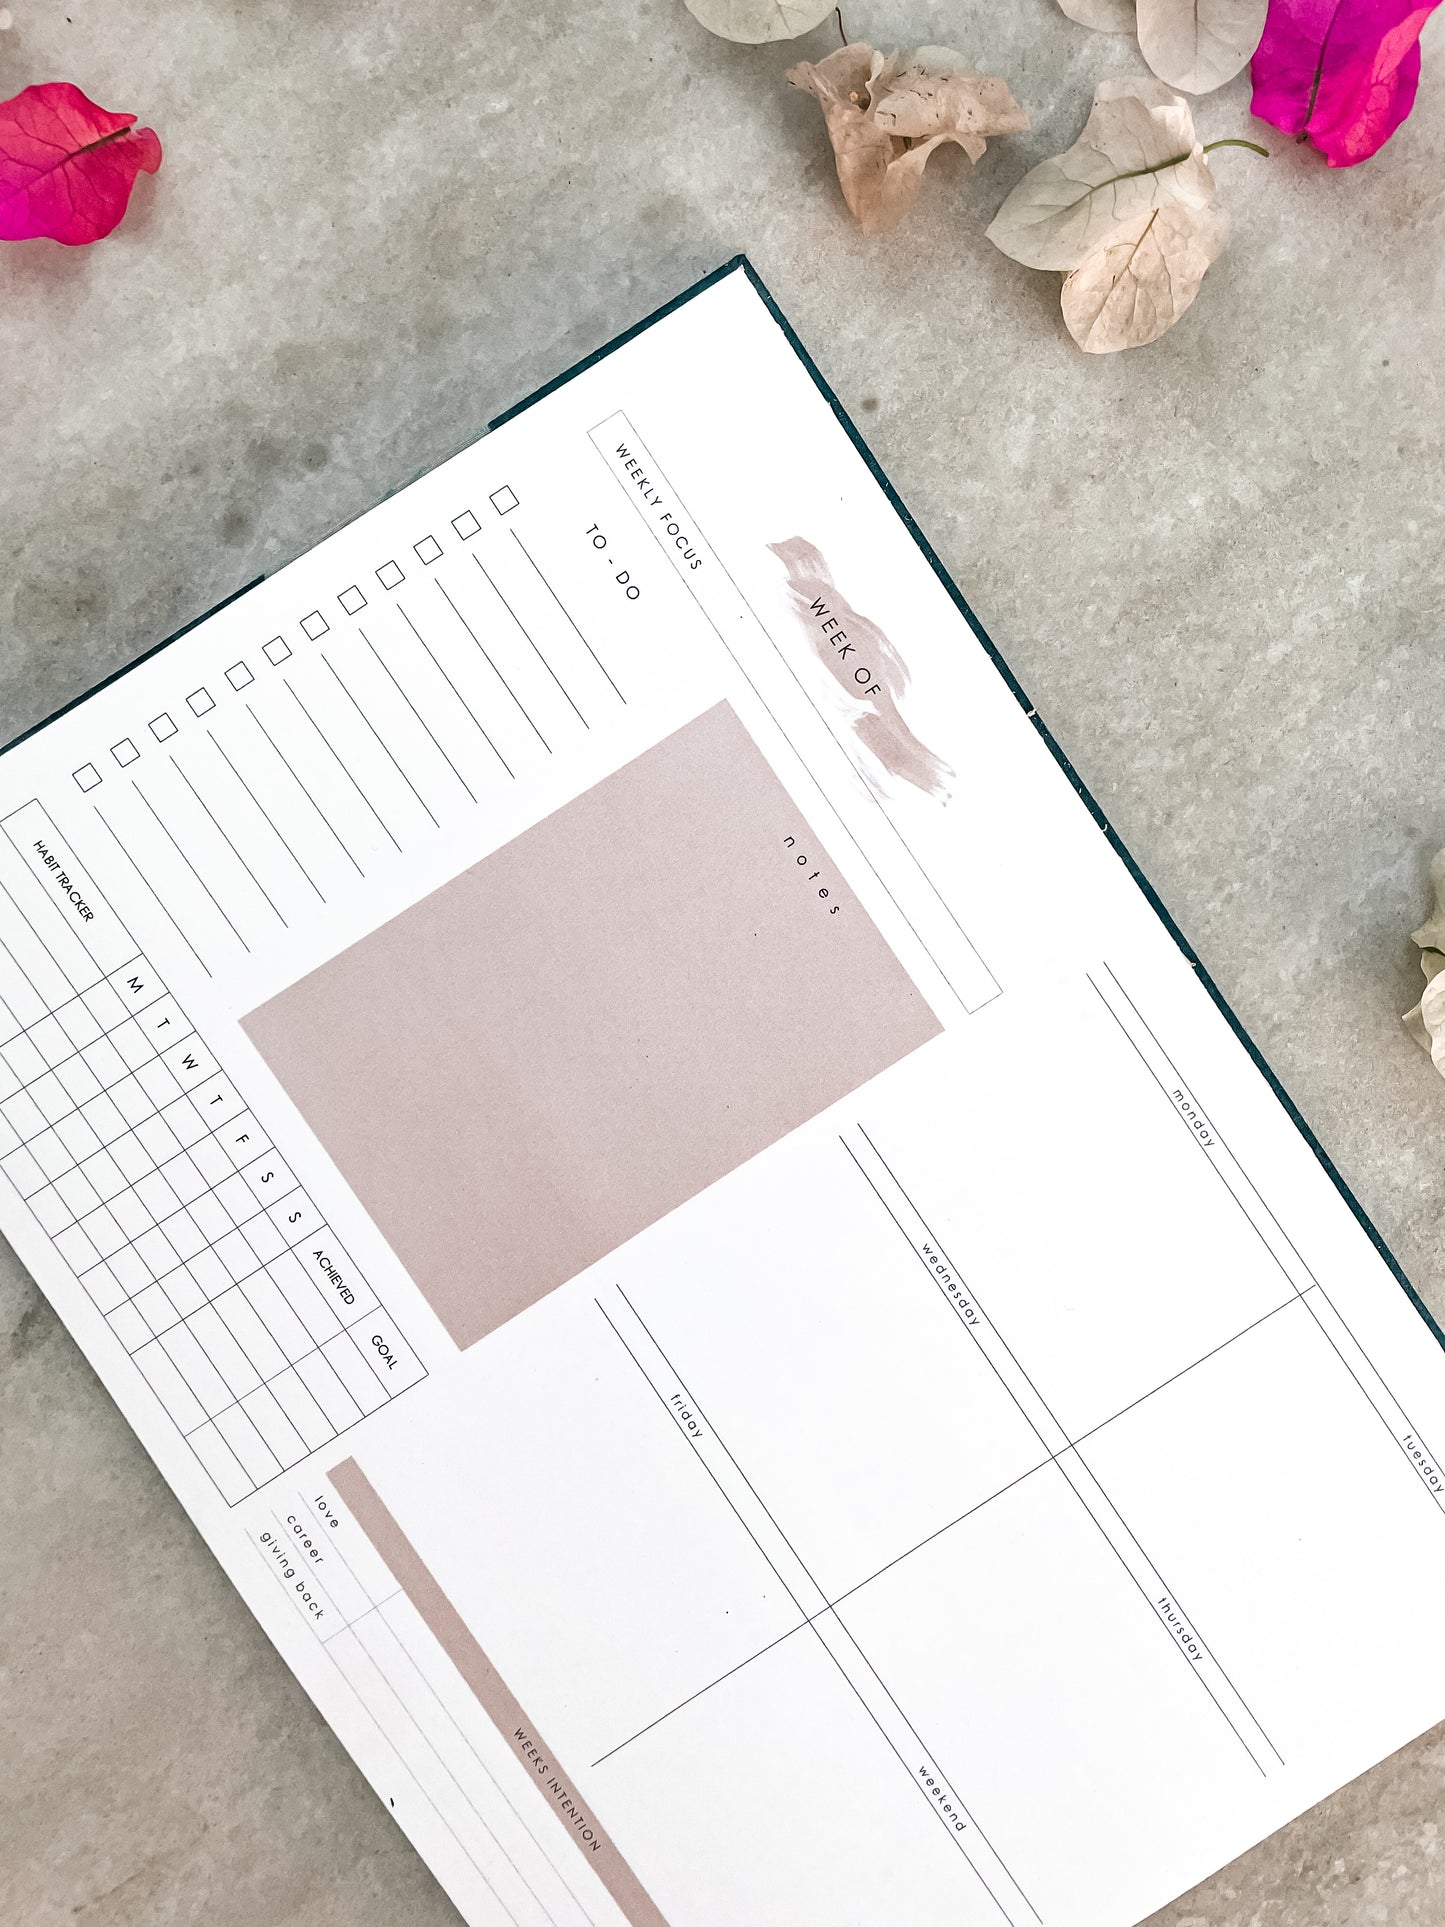 Weekly Planner Notepads